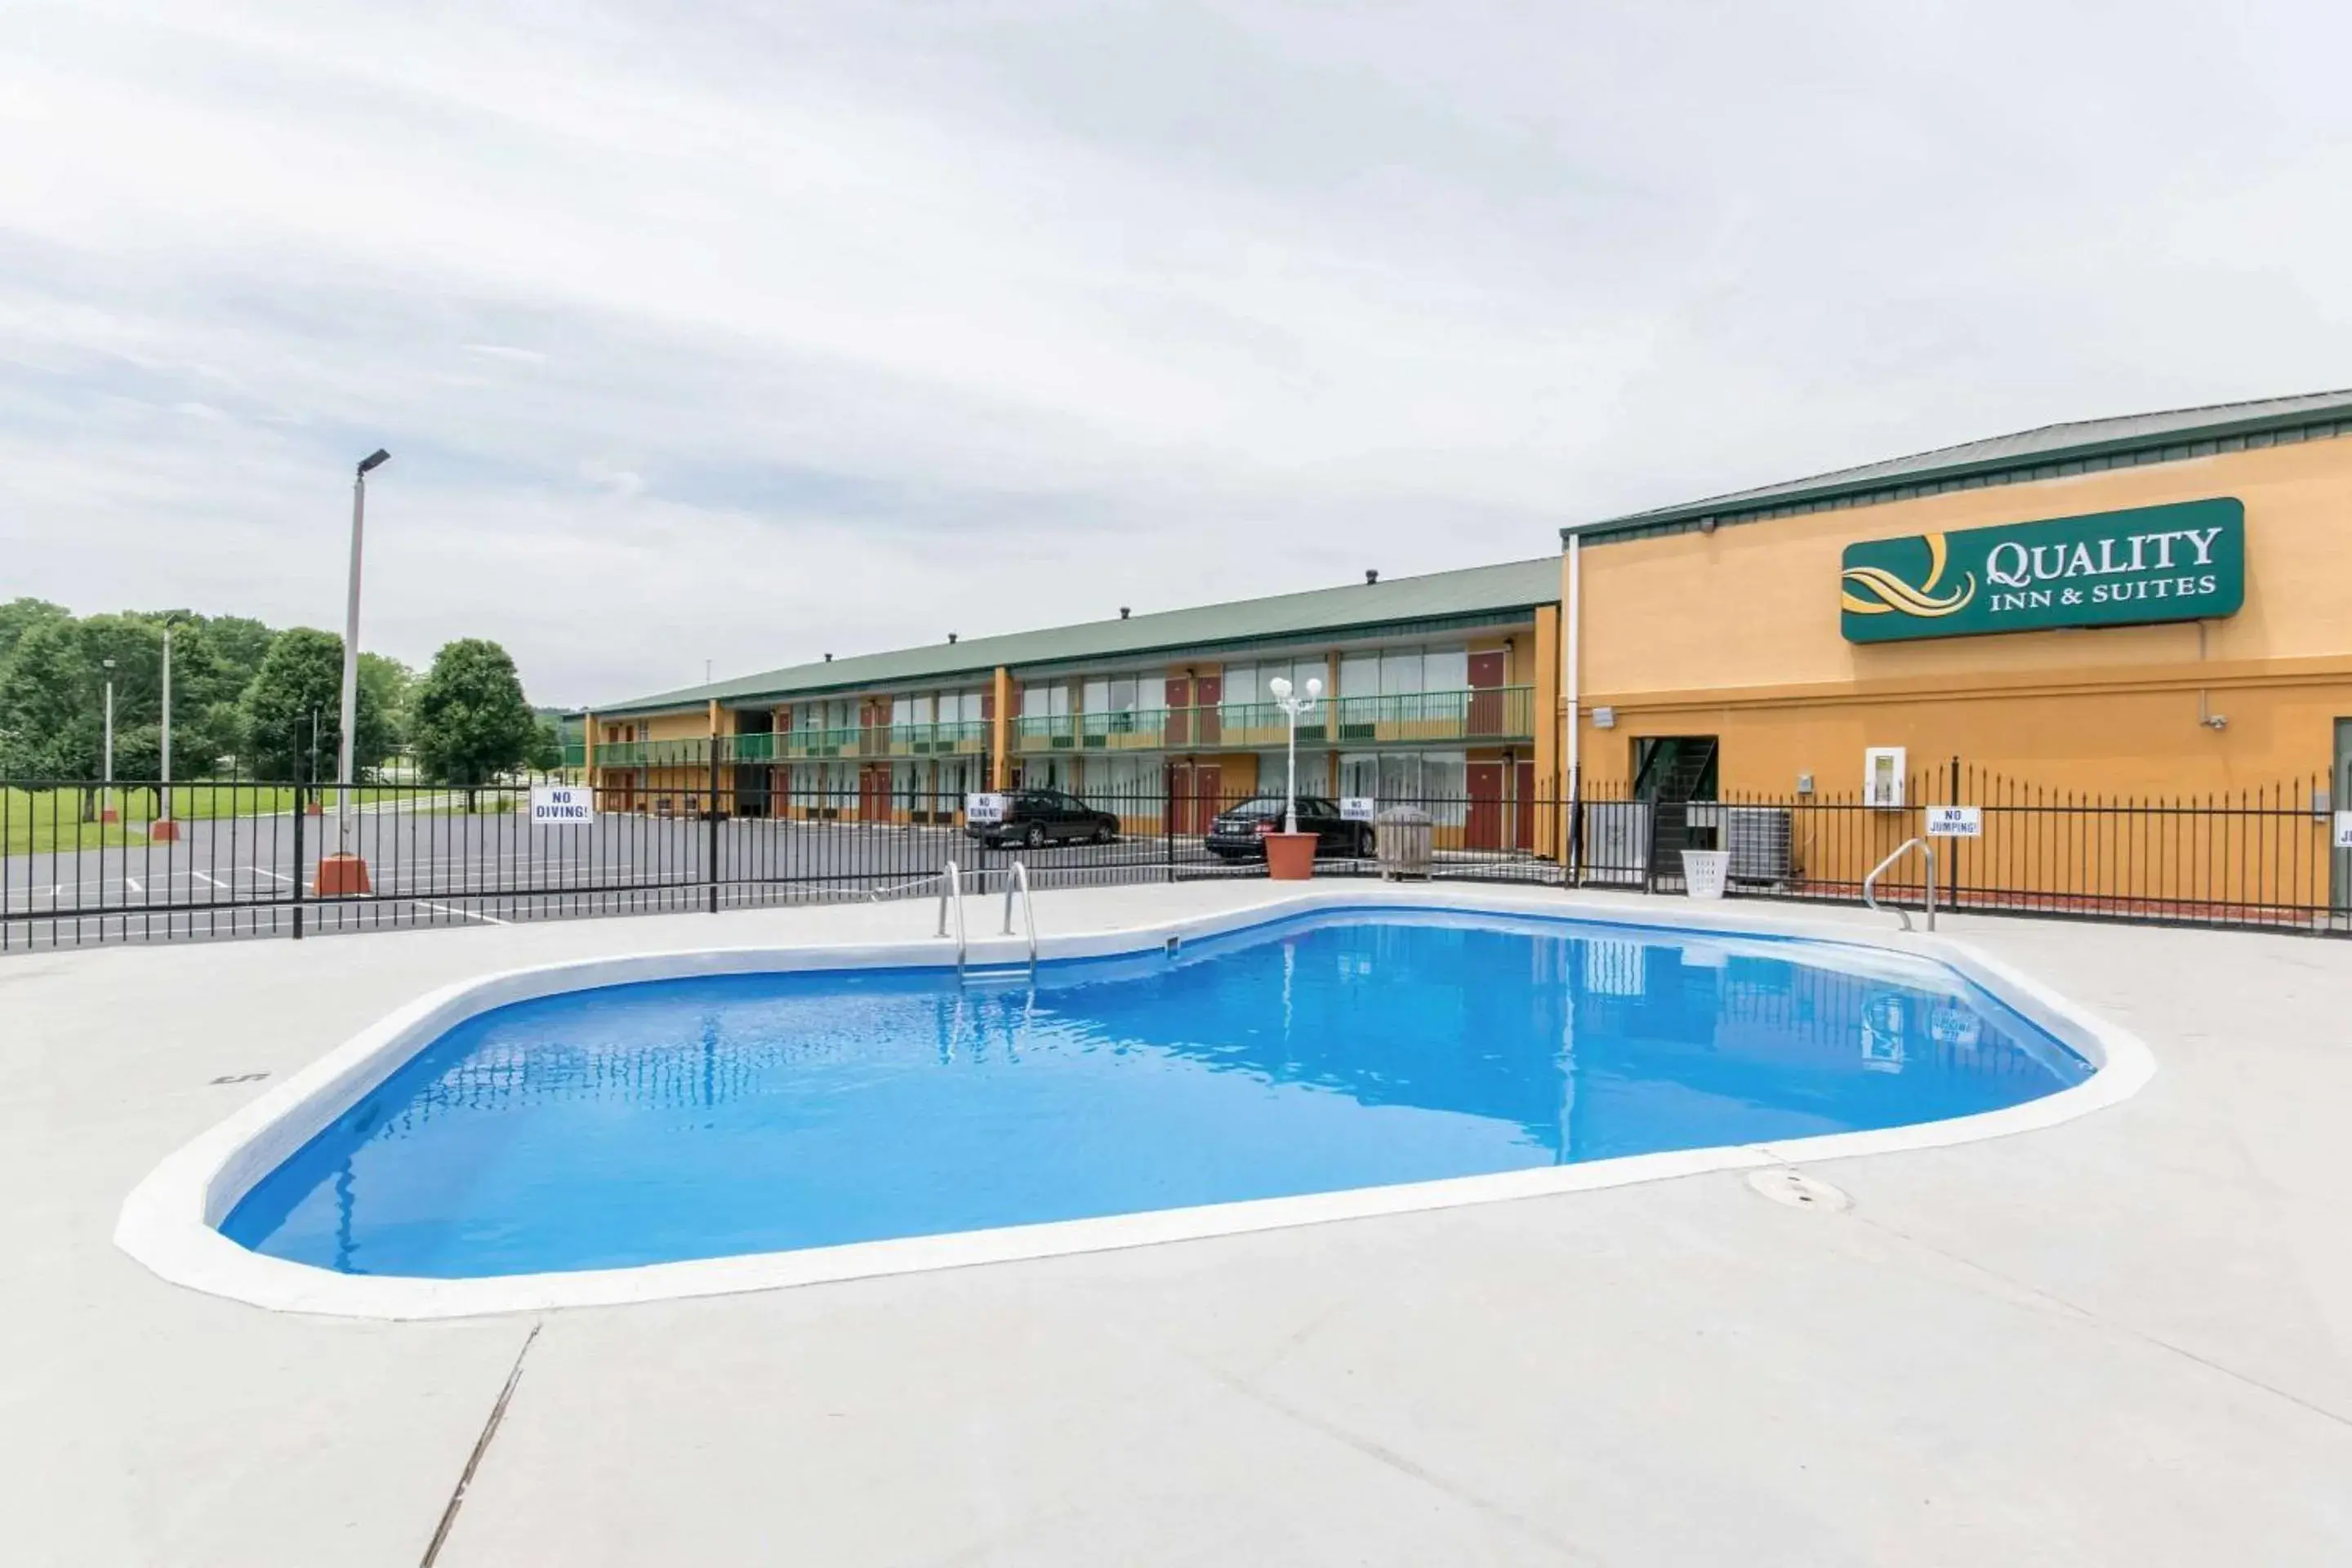 On site, Swimming Pool in Quality Inn & Suites - Horse Cave